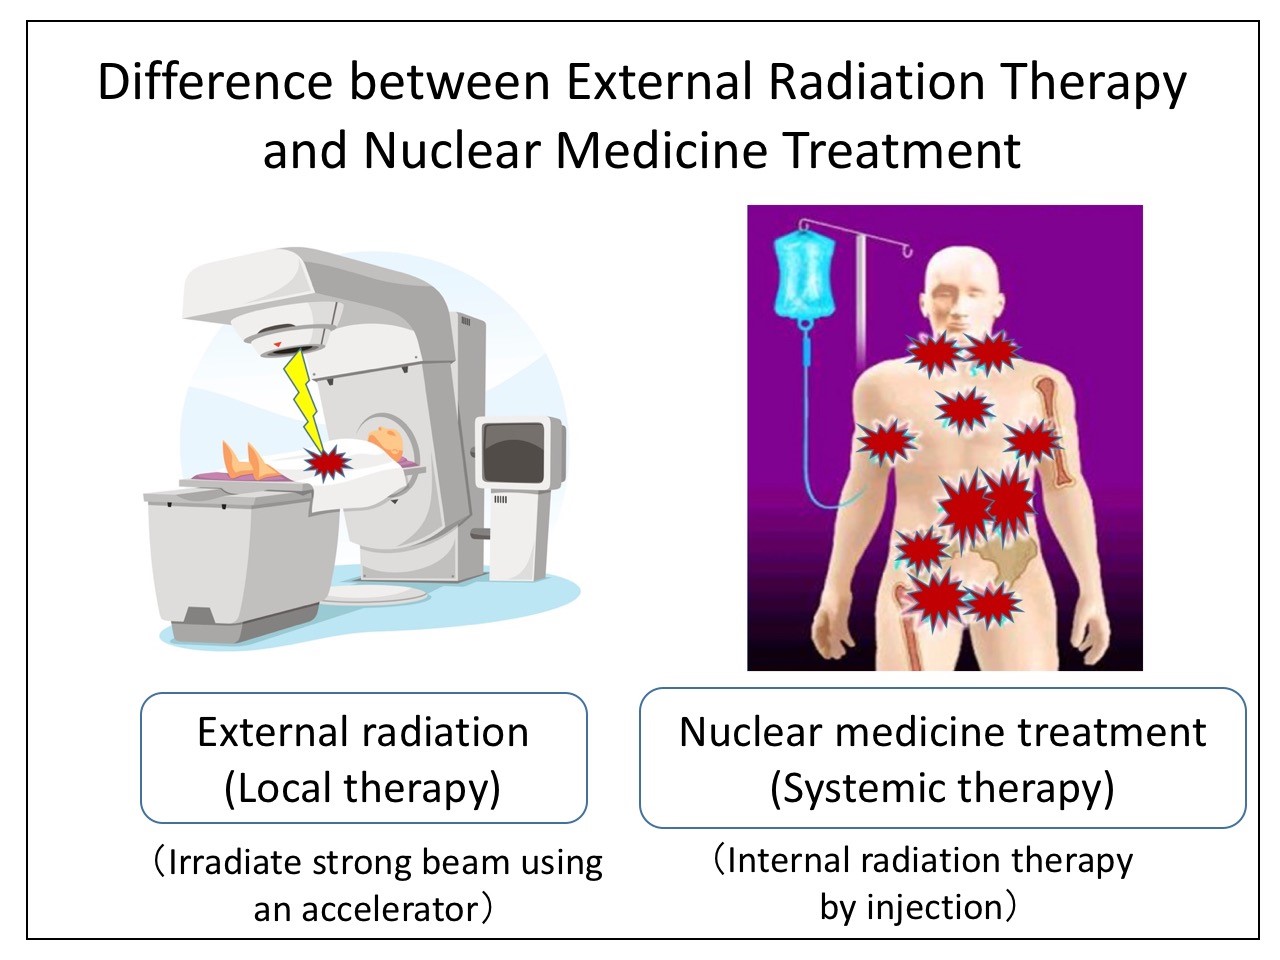 Breakthrough alpharay treatment of cancer without external radiation